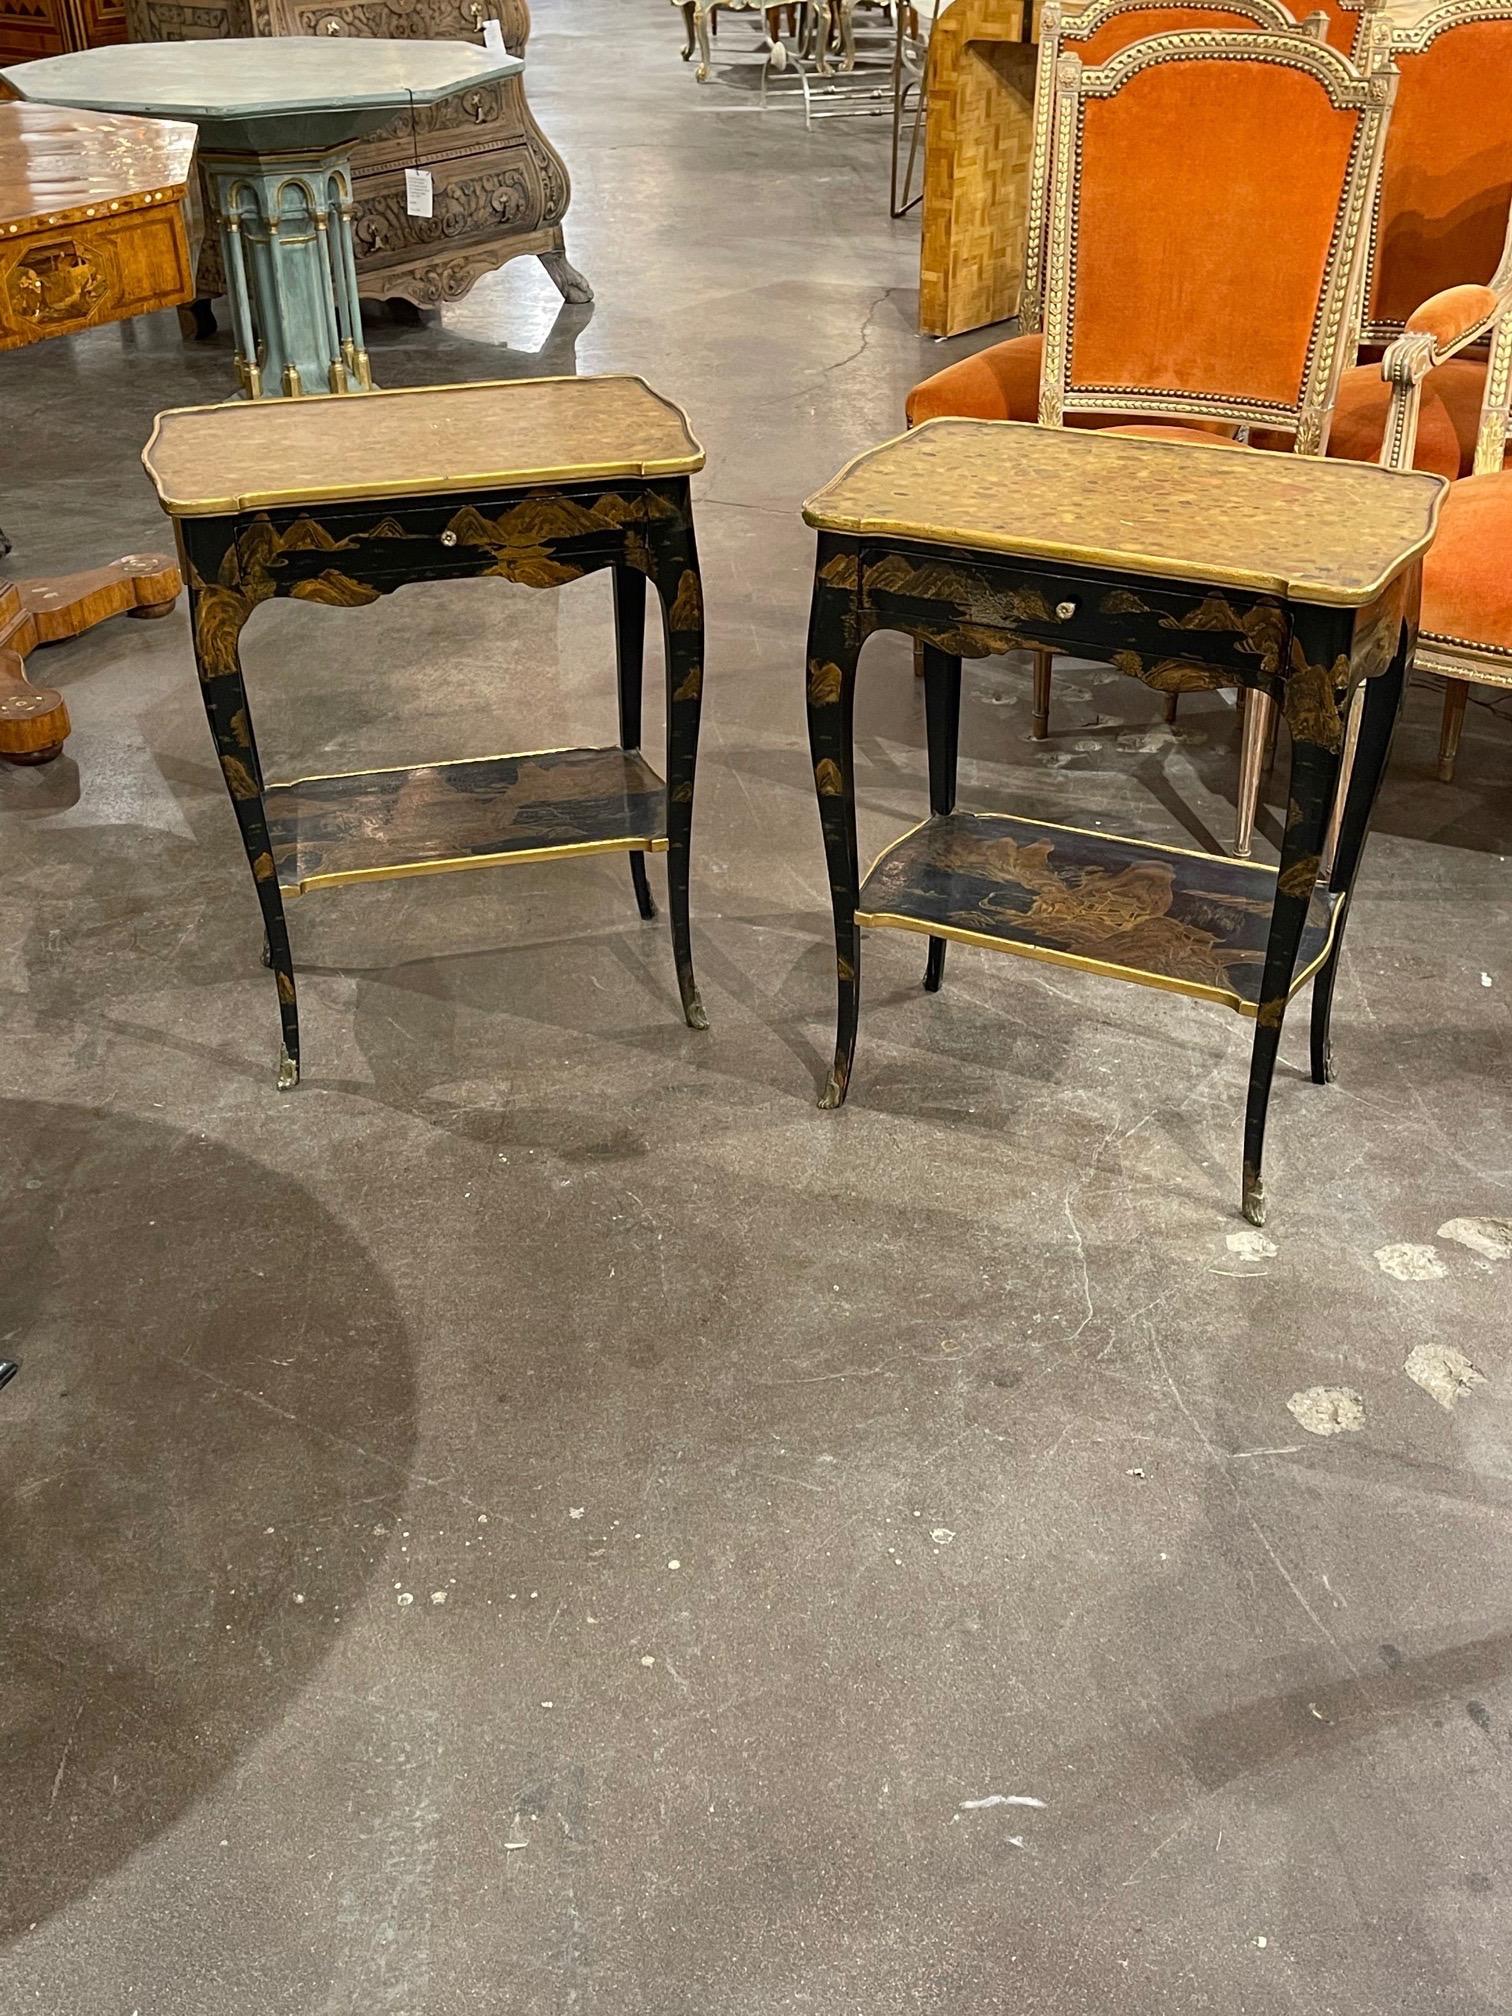 Very fine pair of 19th century French black lacquered tables with hand painted chinoiserie design. So elegant!